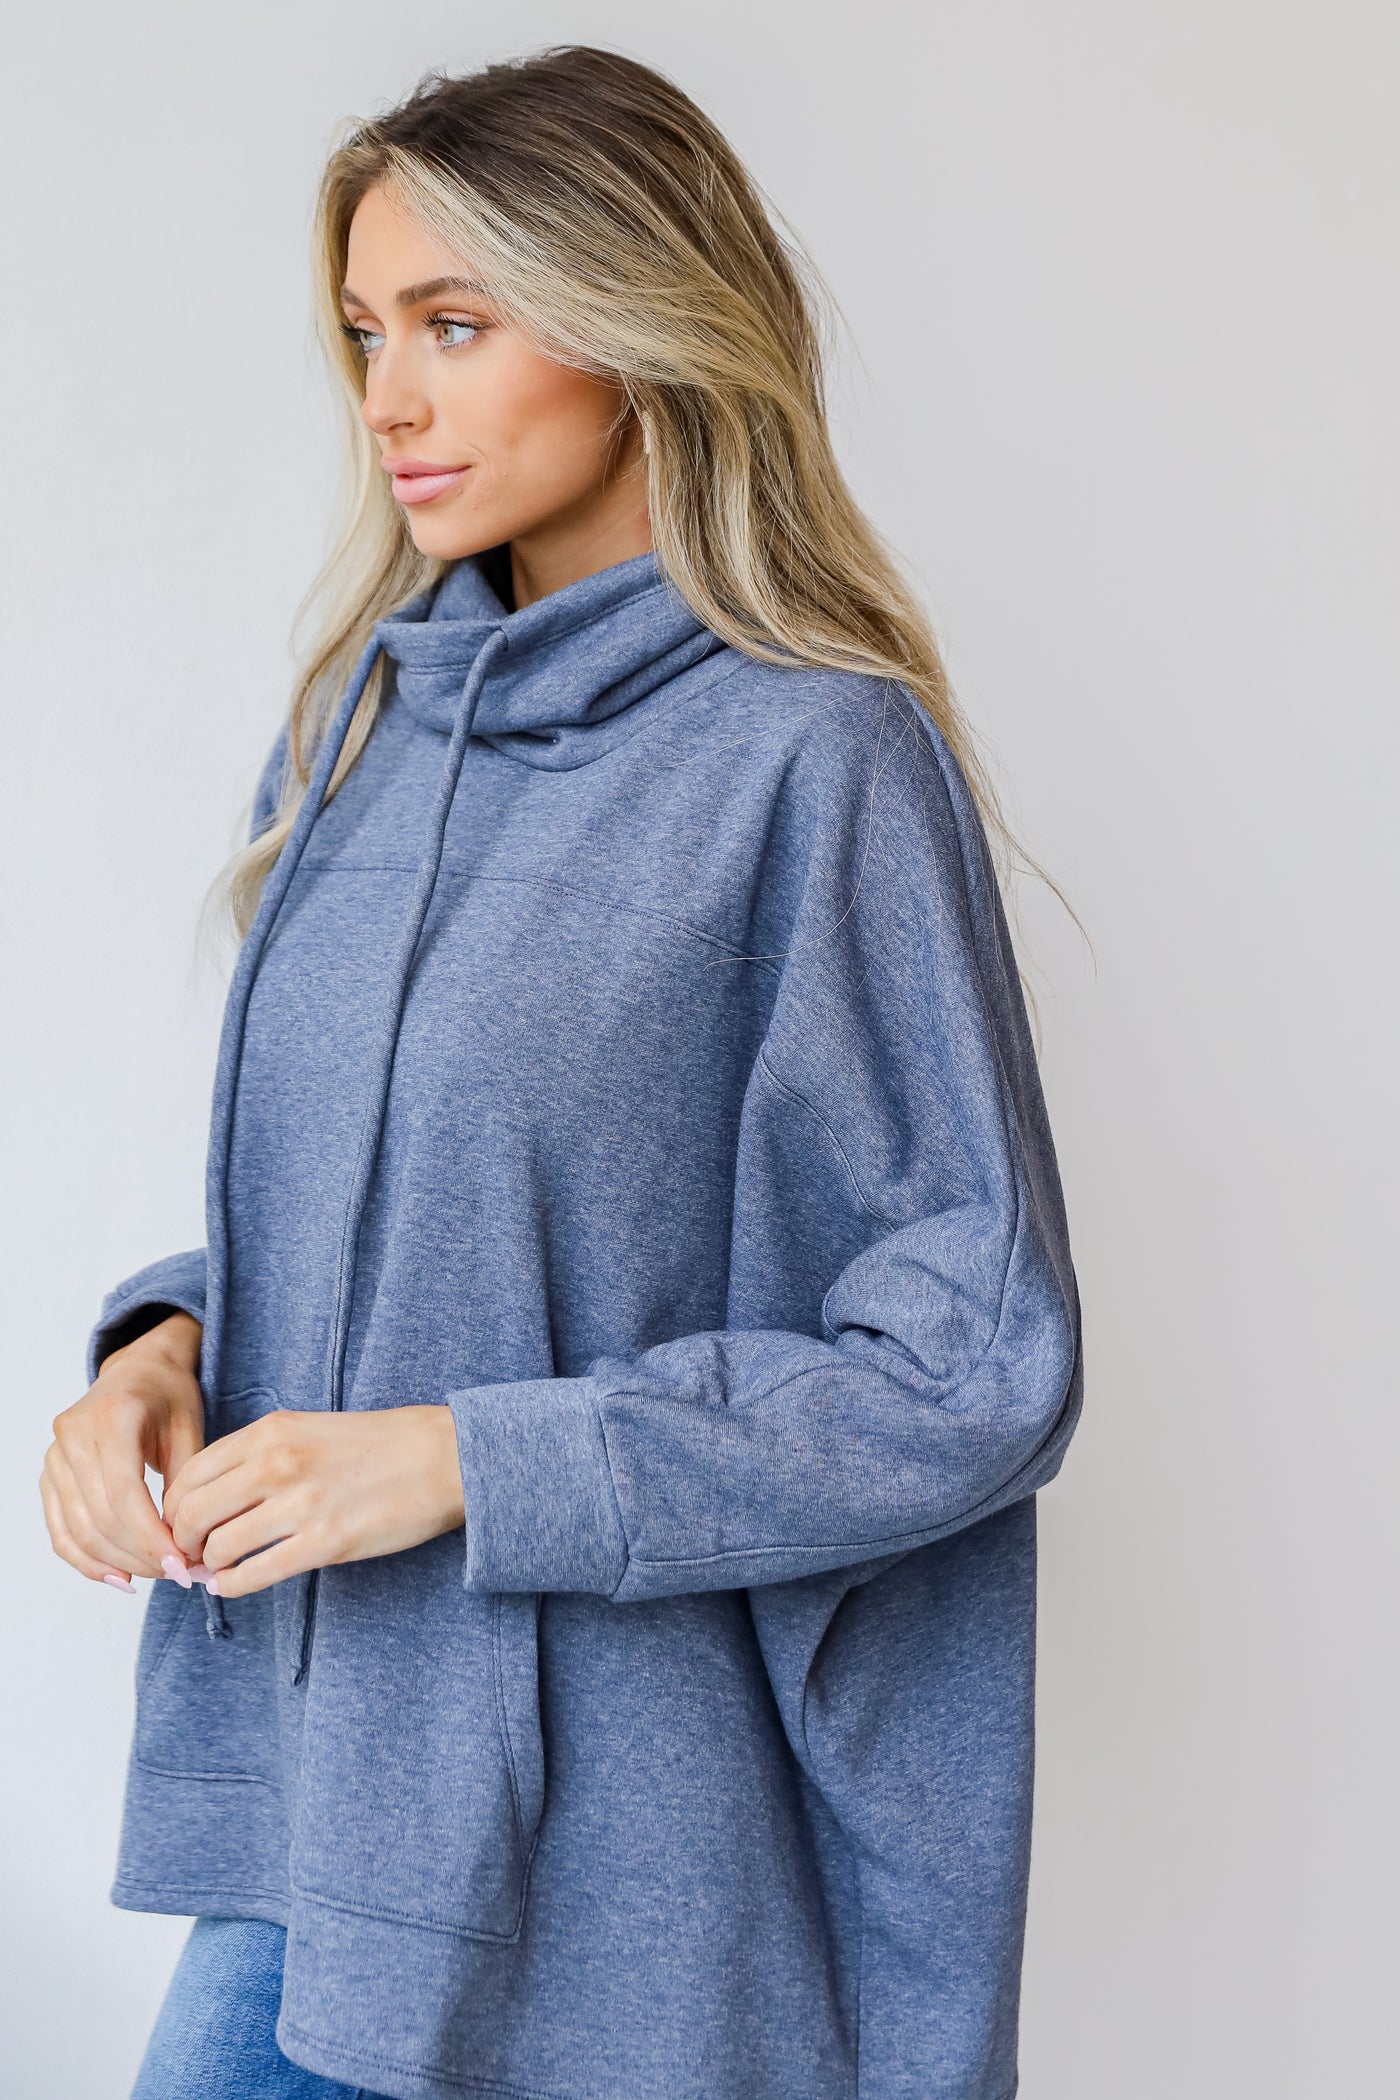 Cowl Neck Pullover in navy side view